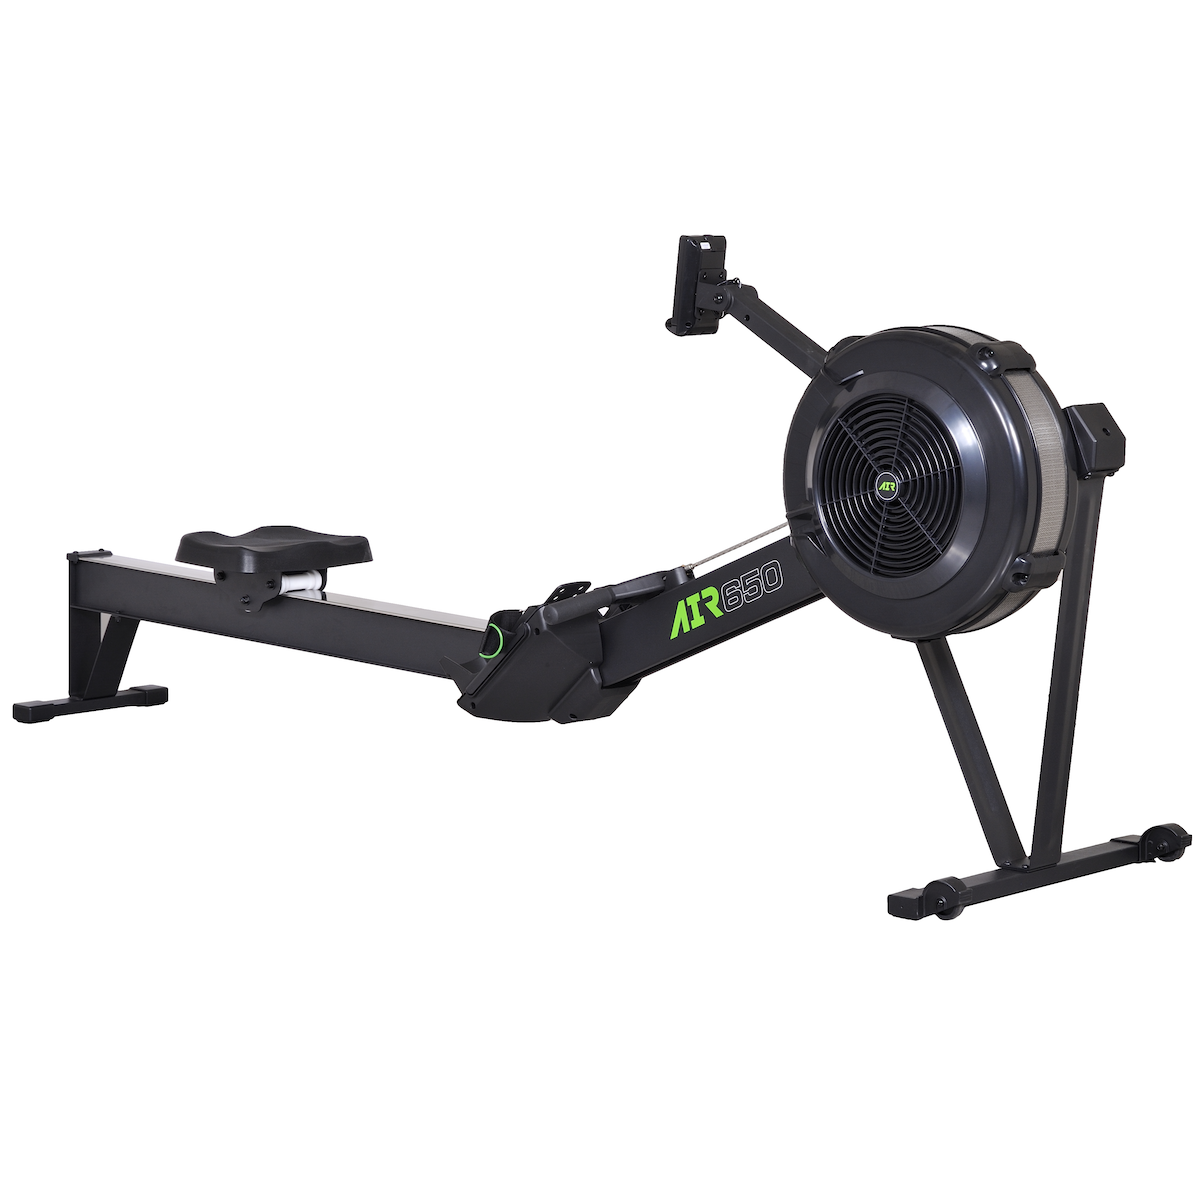 Semicomercial, FTMS, Jkexer 650 Air Rower